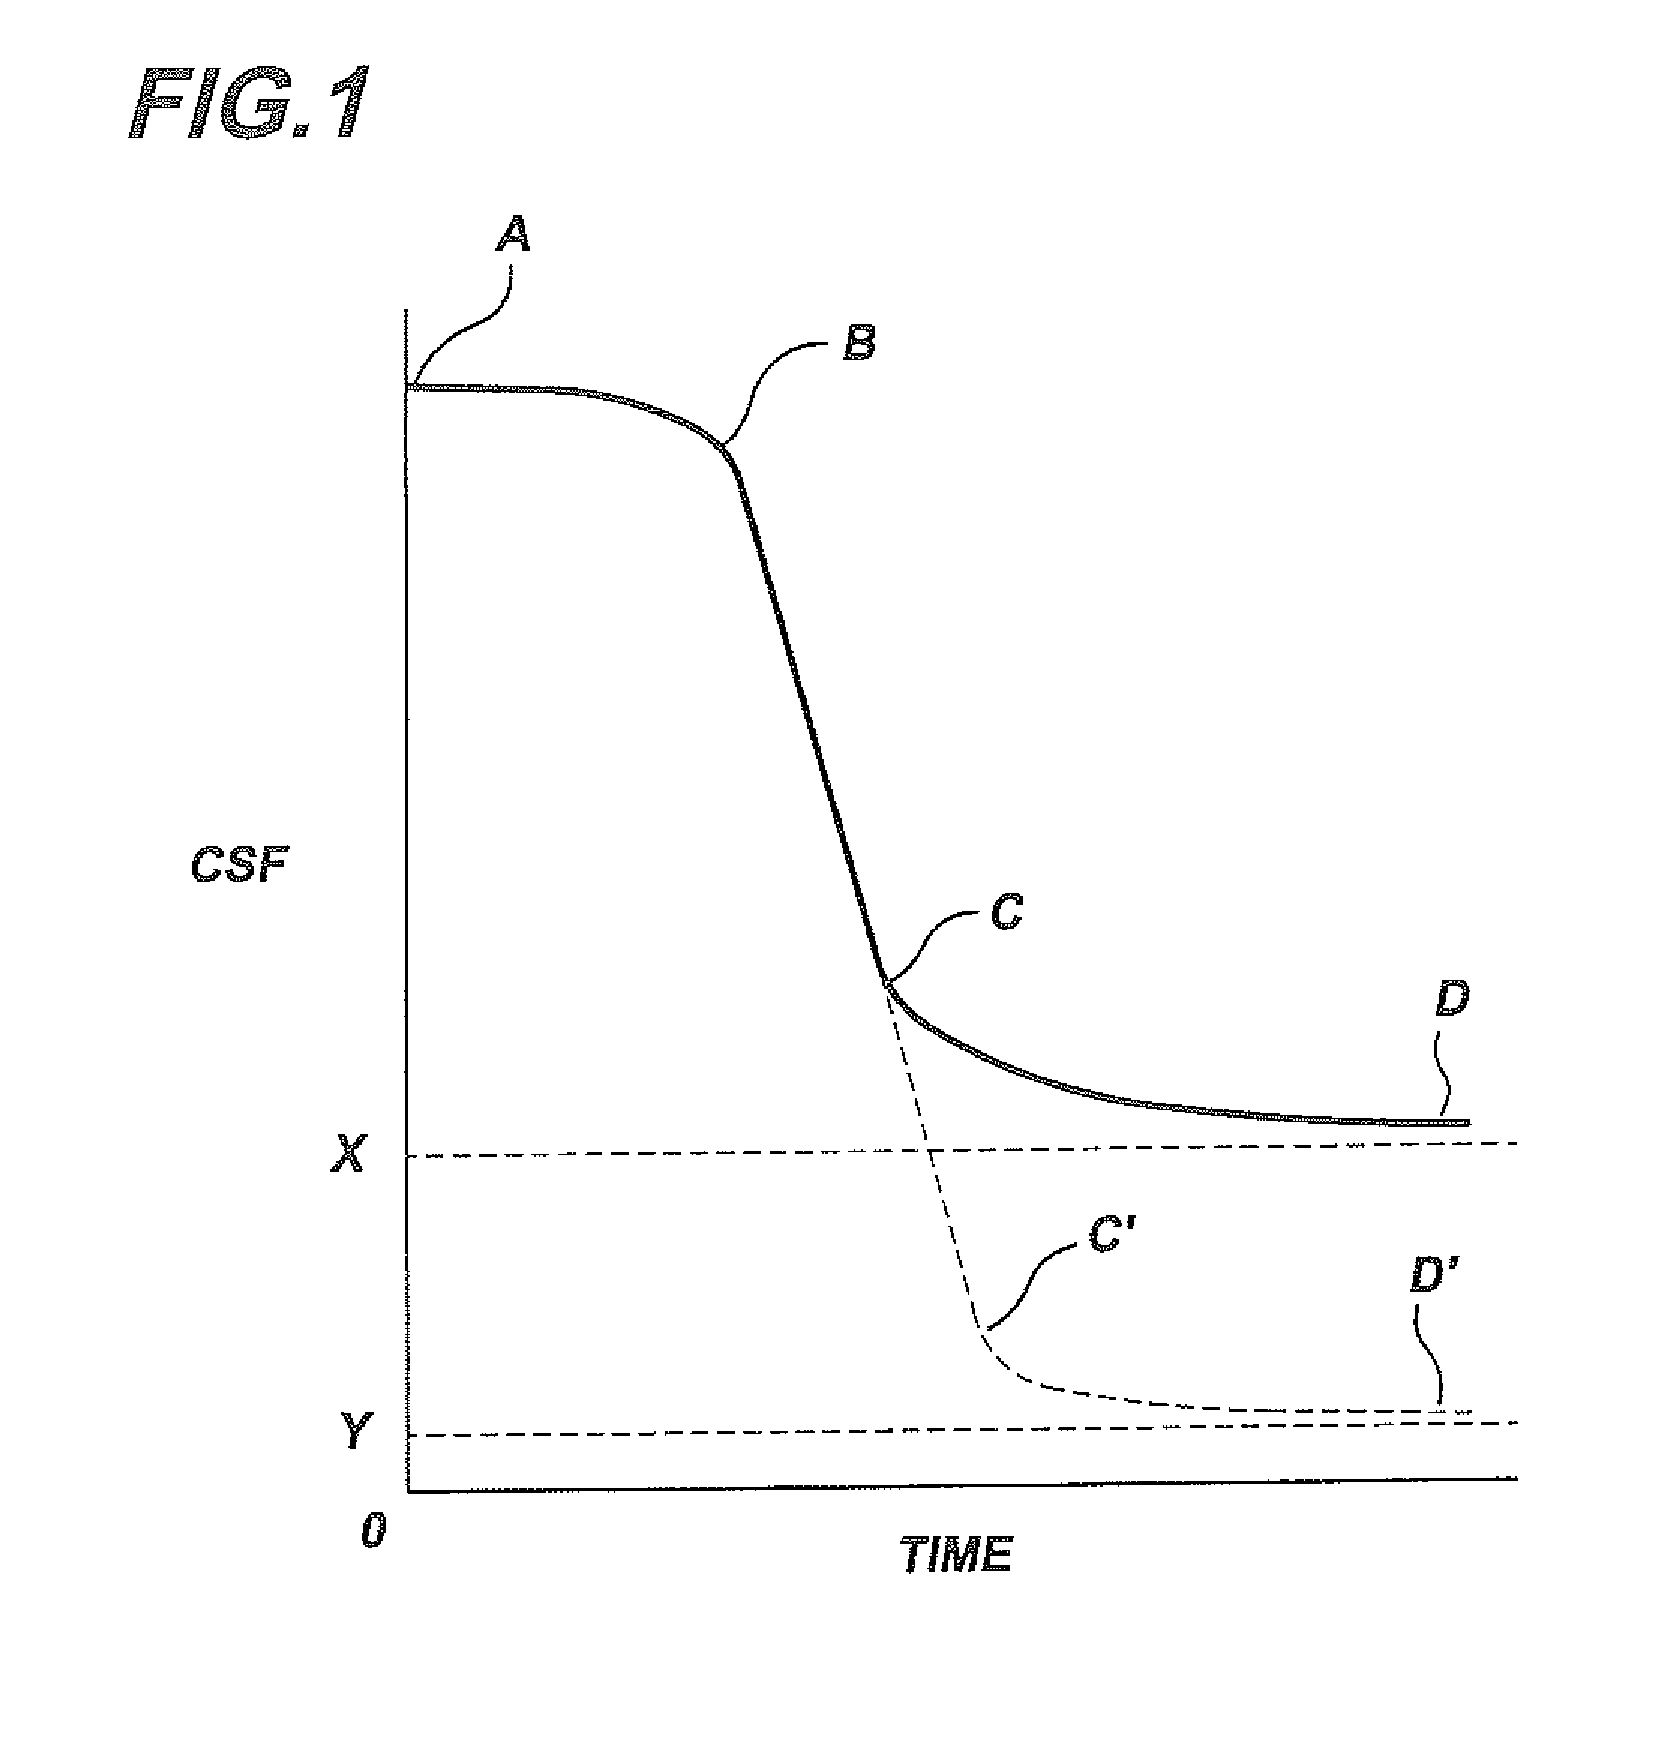 Process for producing fibrillated fibers